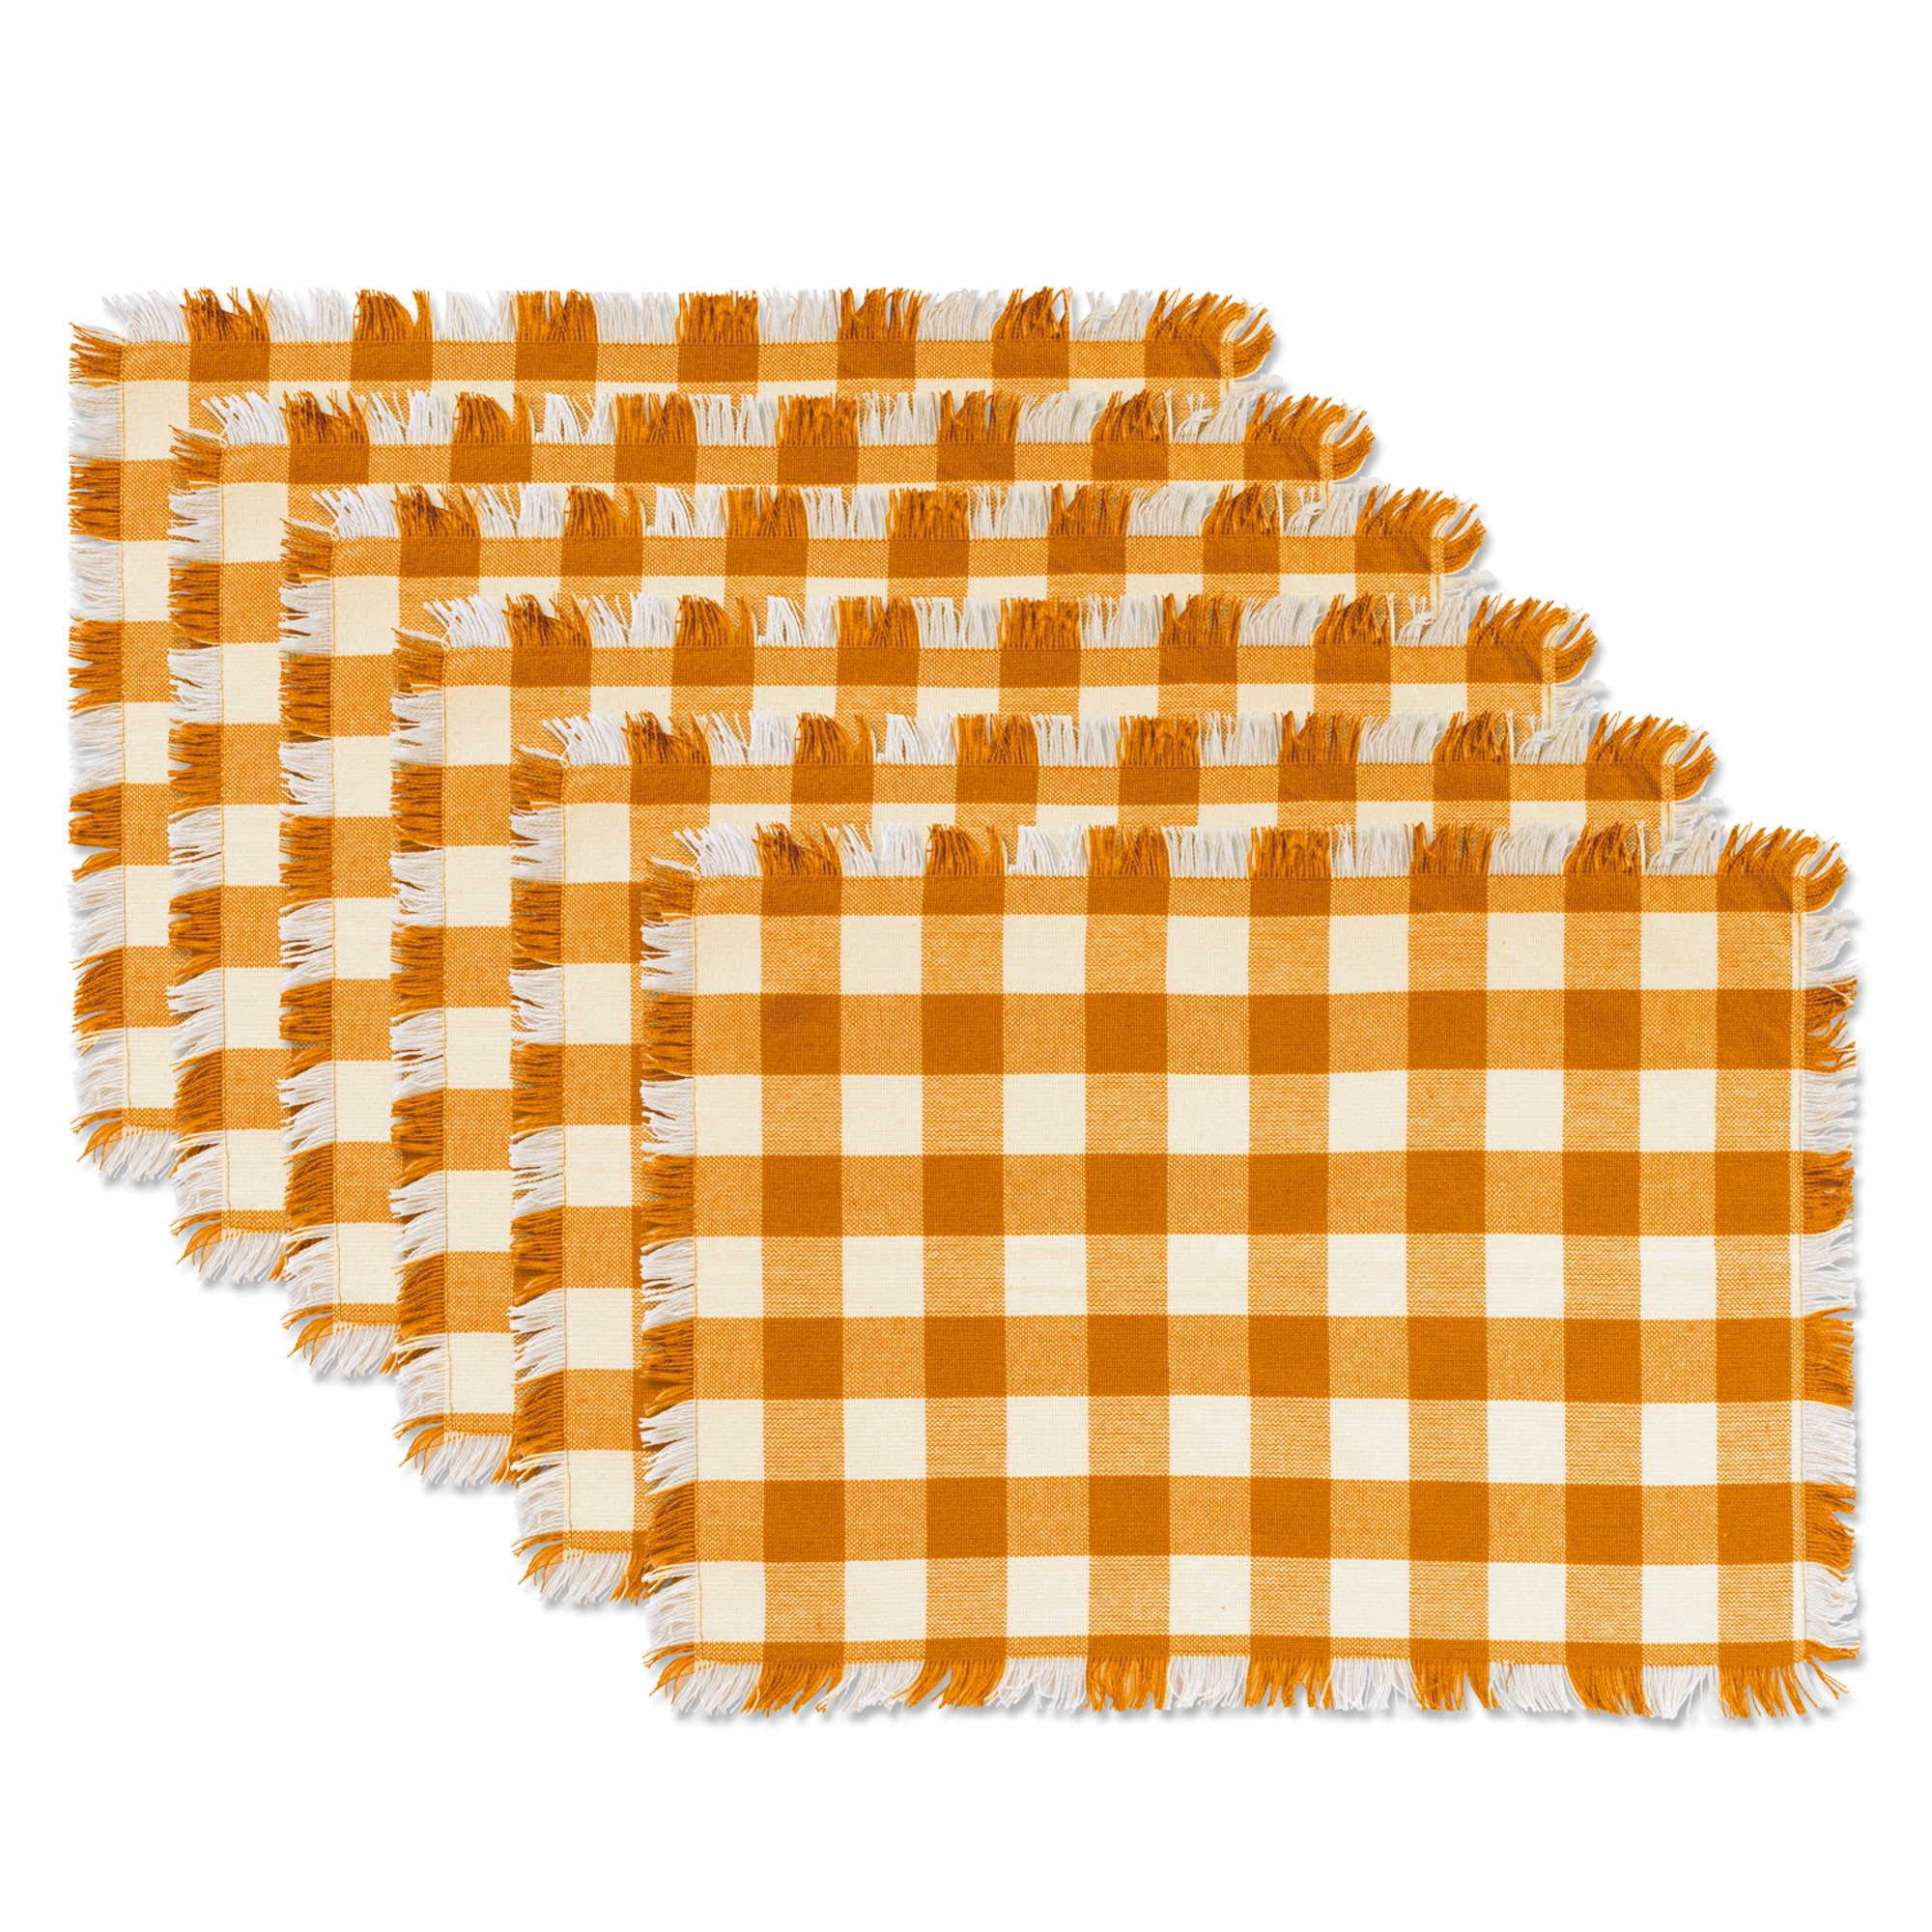 Picture of Design Imports CAMZ37572 13 x 19 in. Pumpkin Spice Heavyweight Check Fringed Placemat - Set of 6